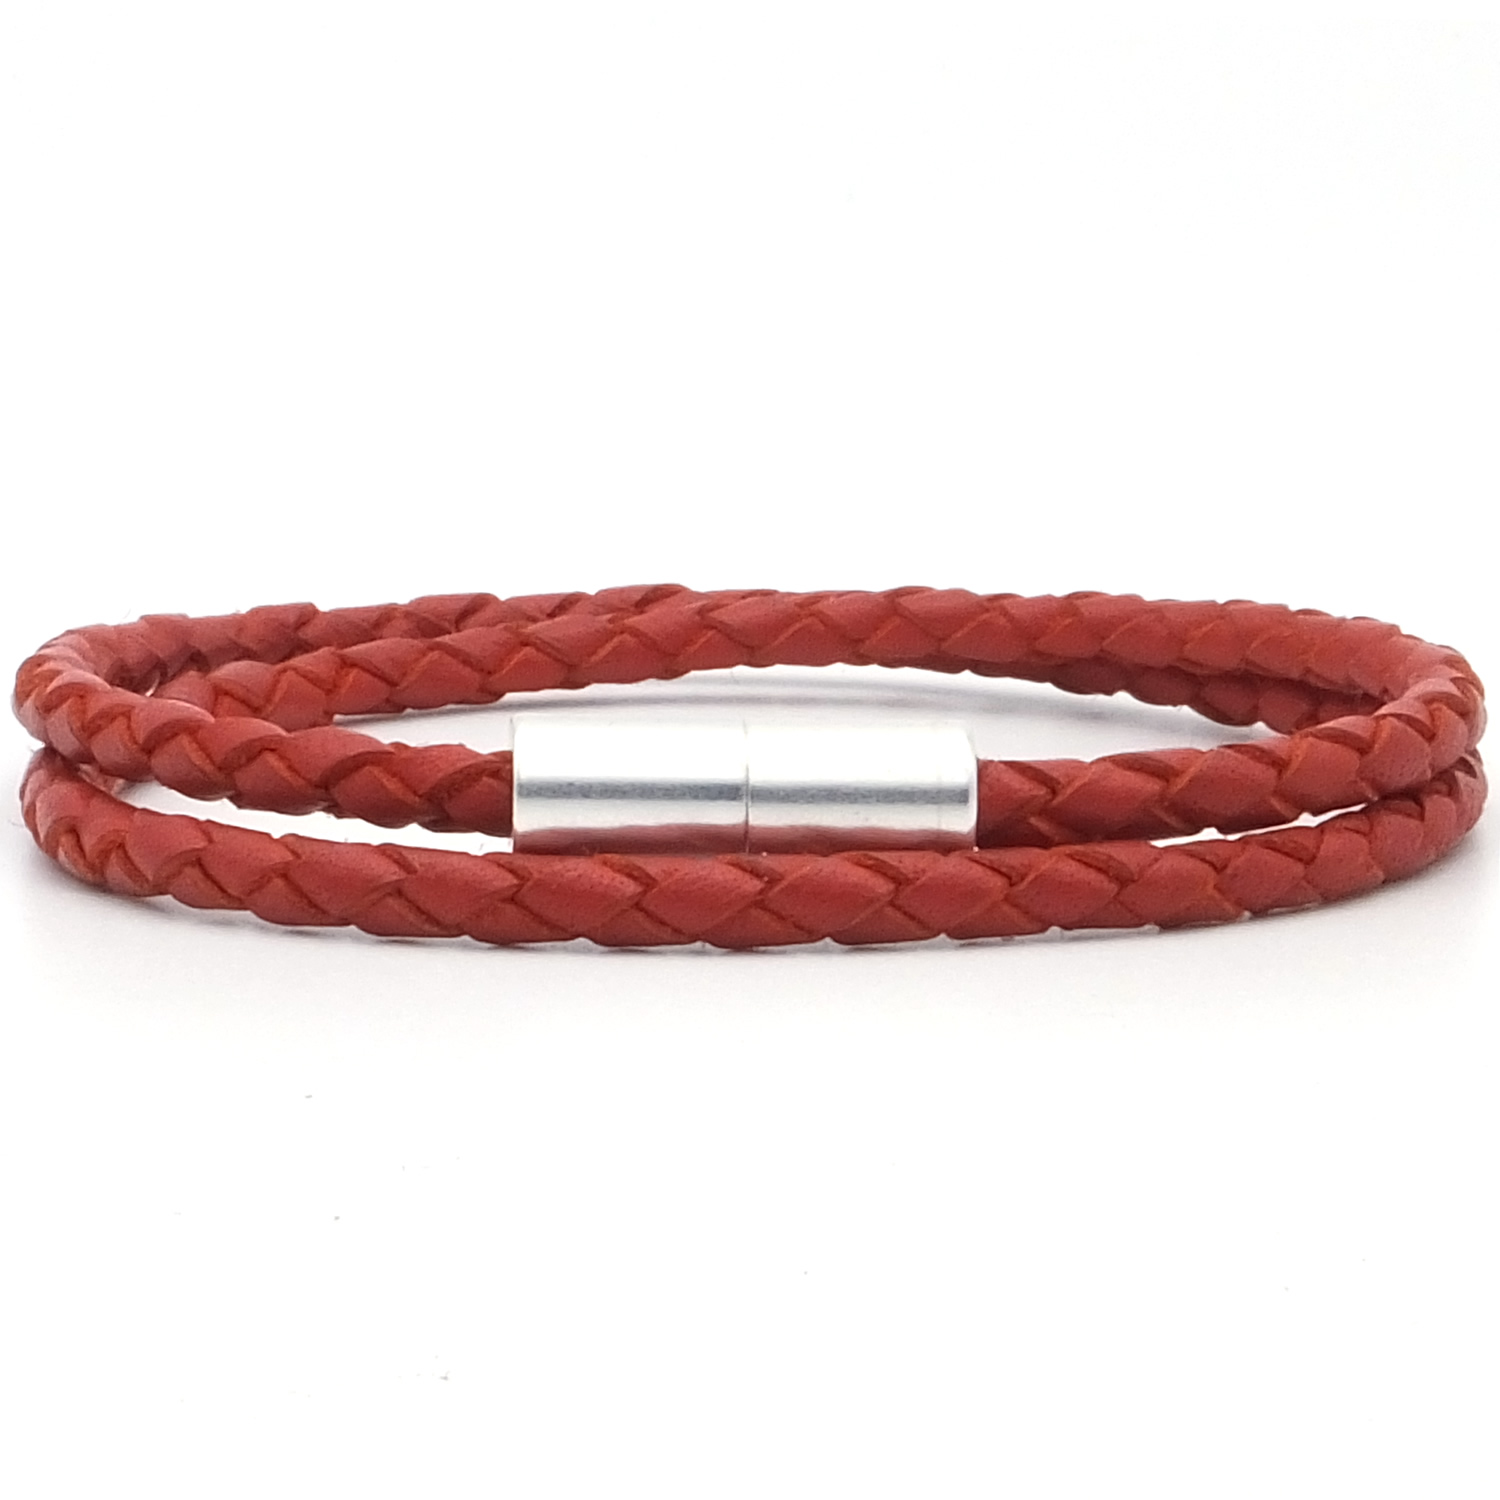 B90/18 Unisex Red Braided Real Leather Bracelet With Snap Clasp 22cm Pack of 1 